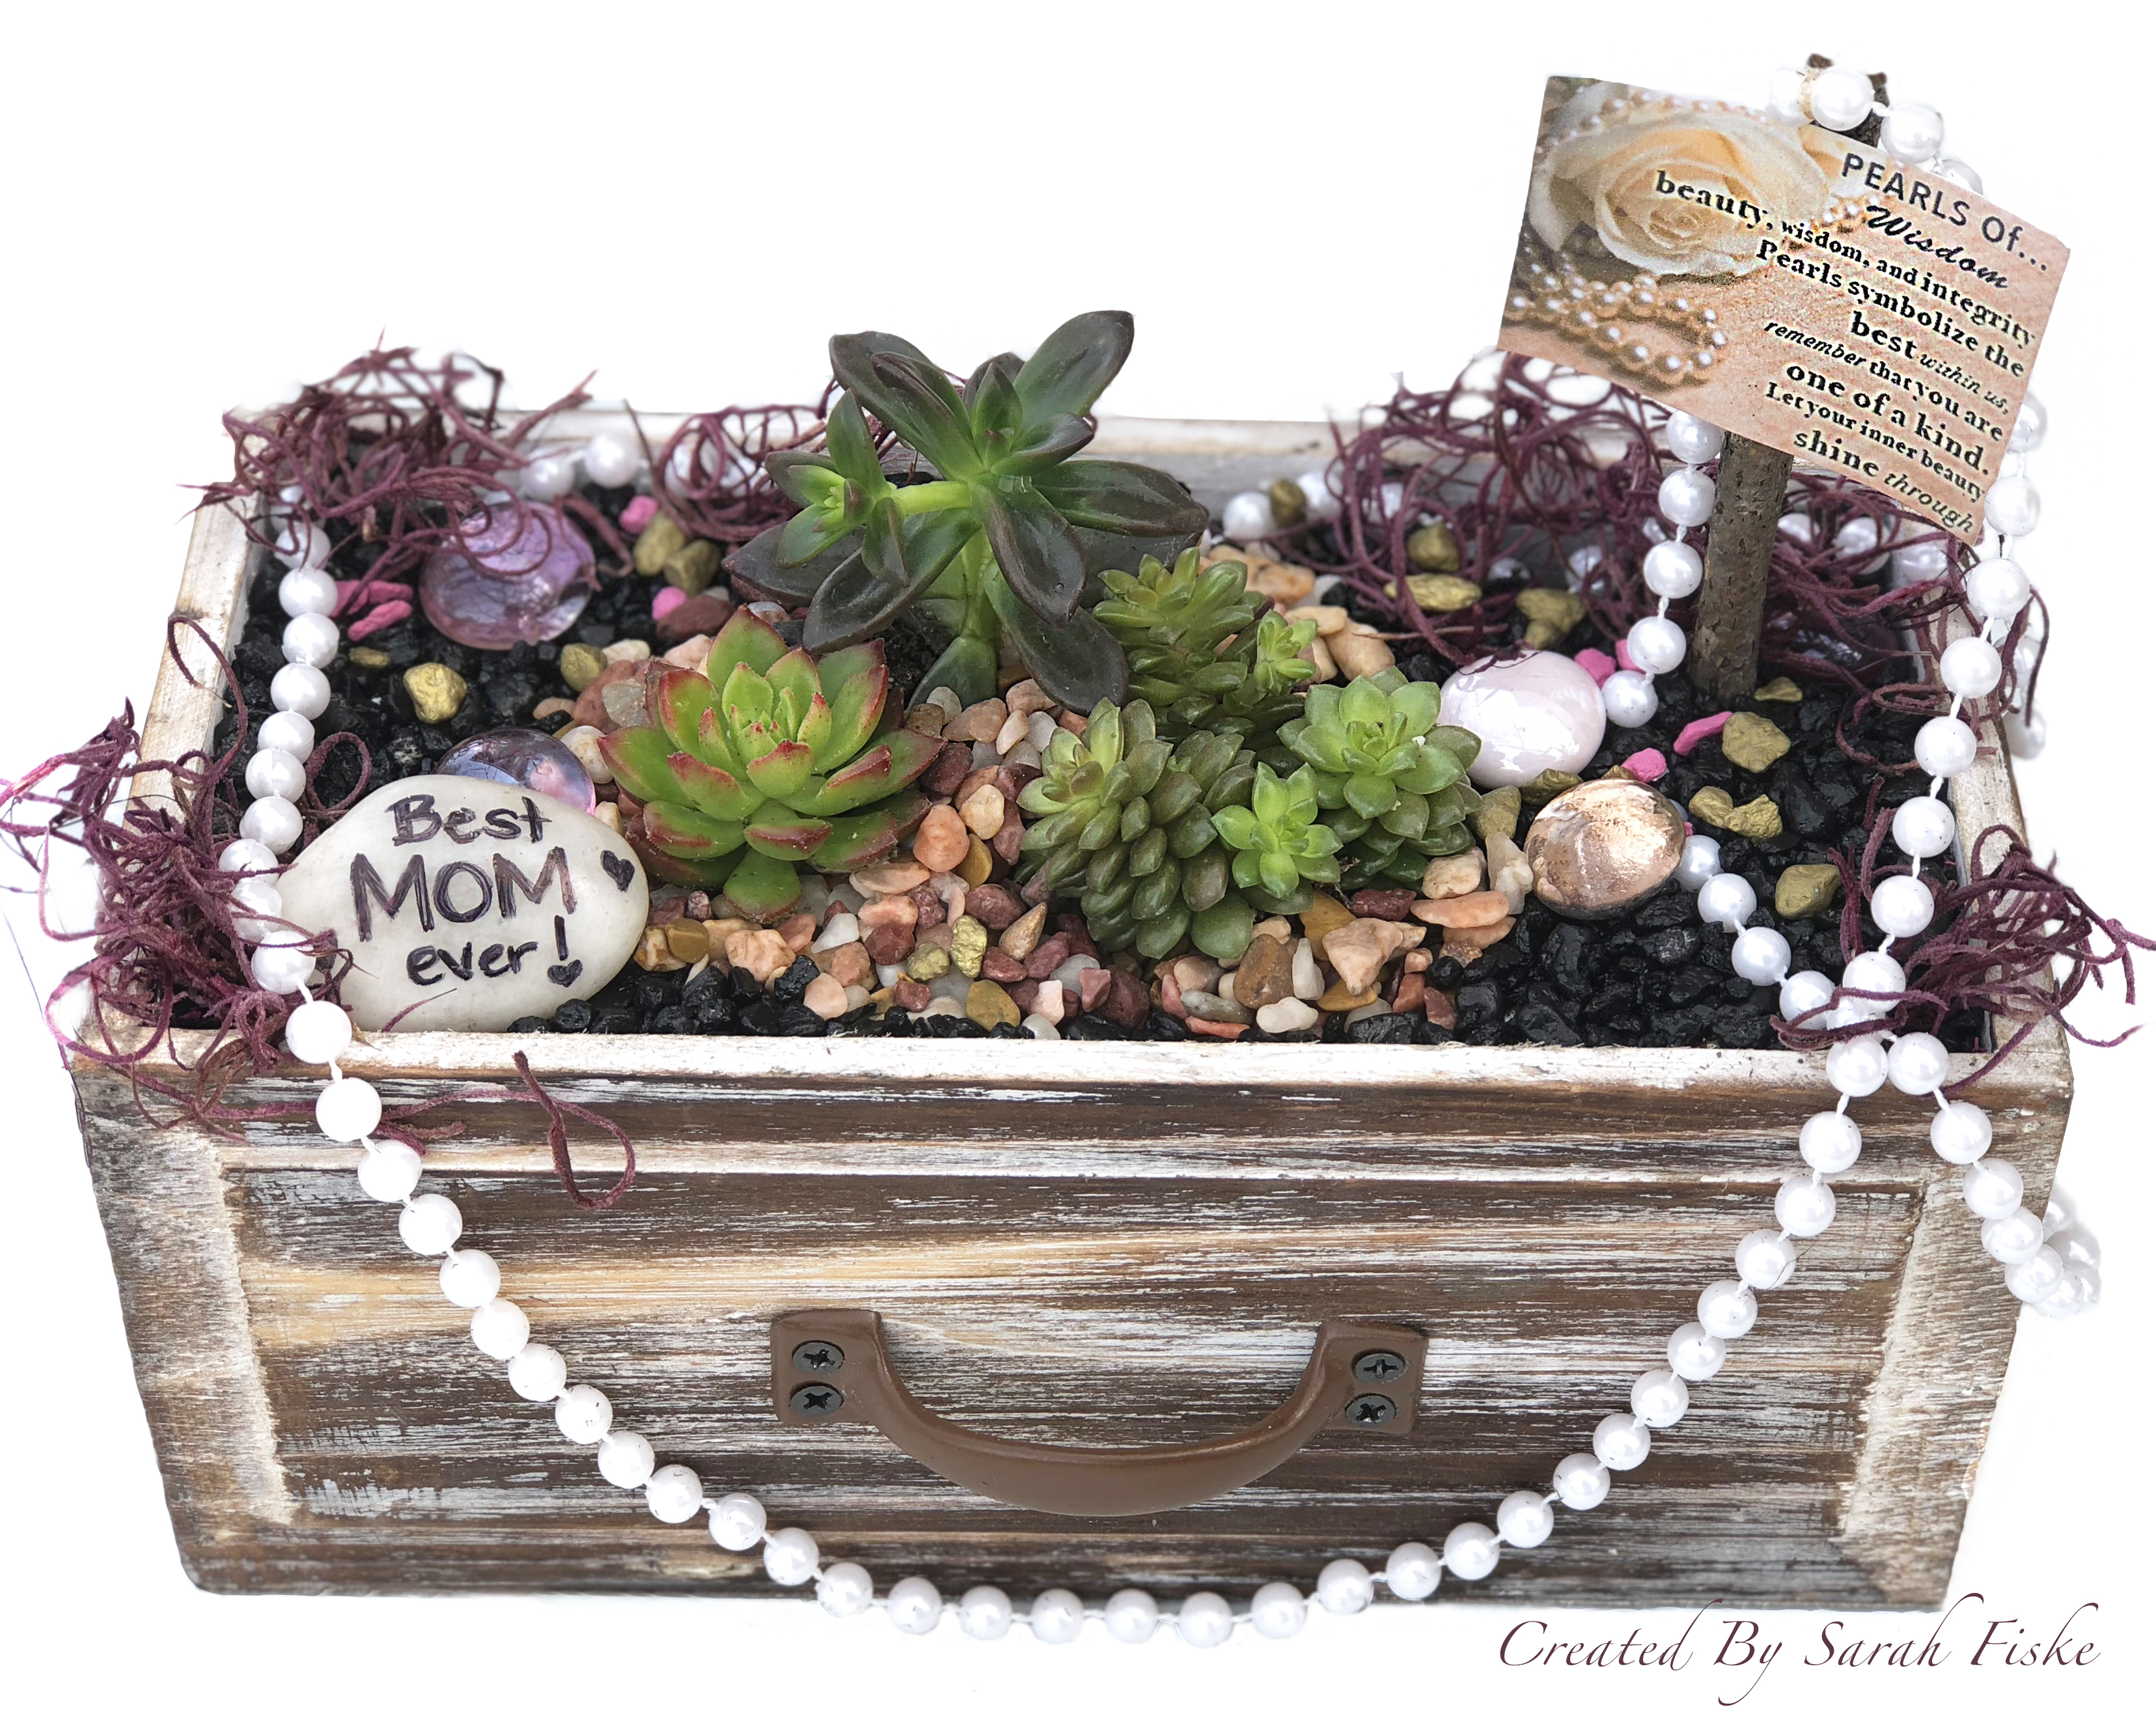 A Pearls of Wisdom in Vintage Distress Drawer plant nite project by Yaymaker